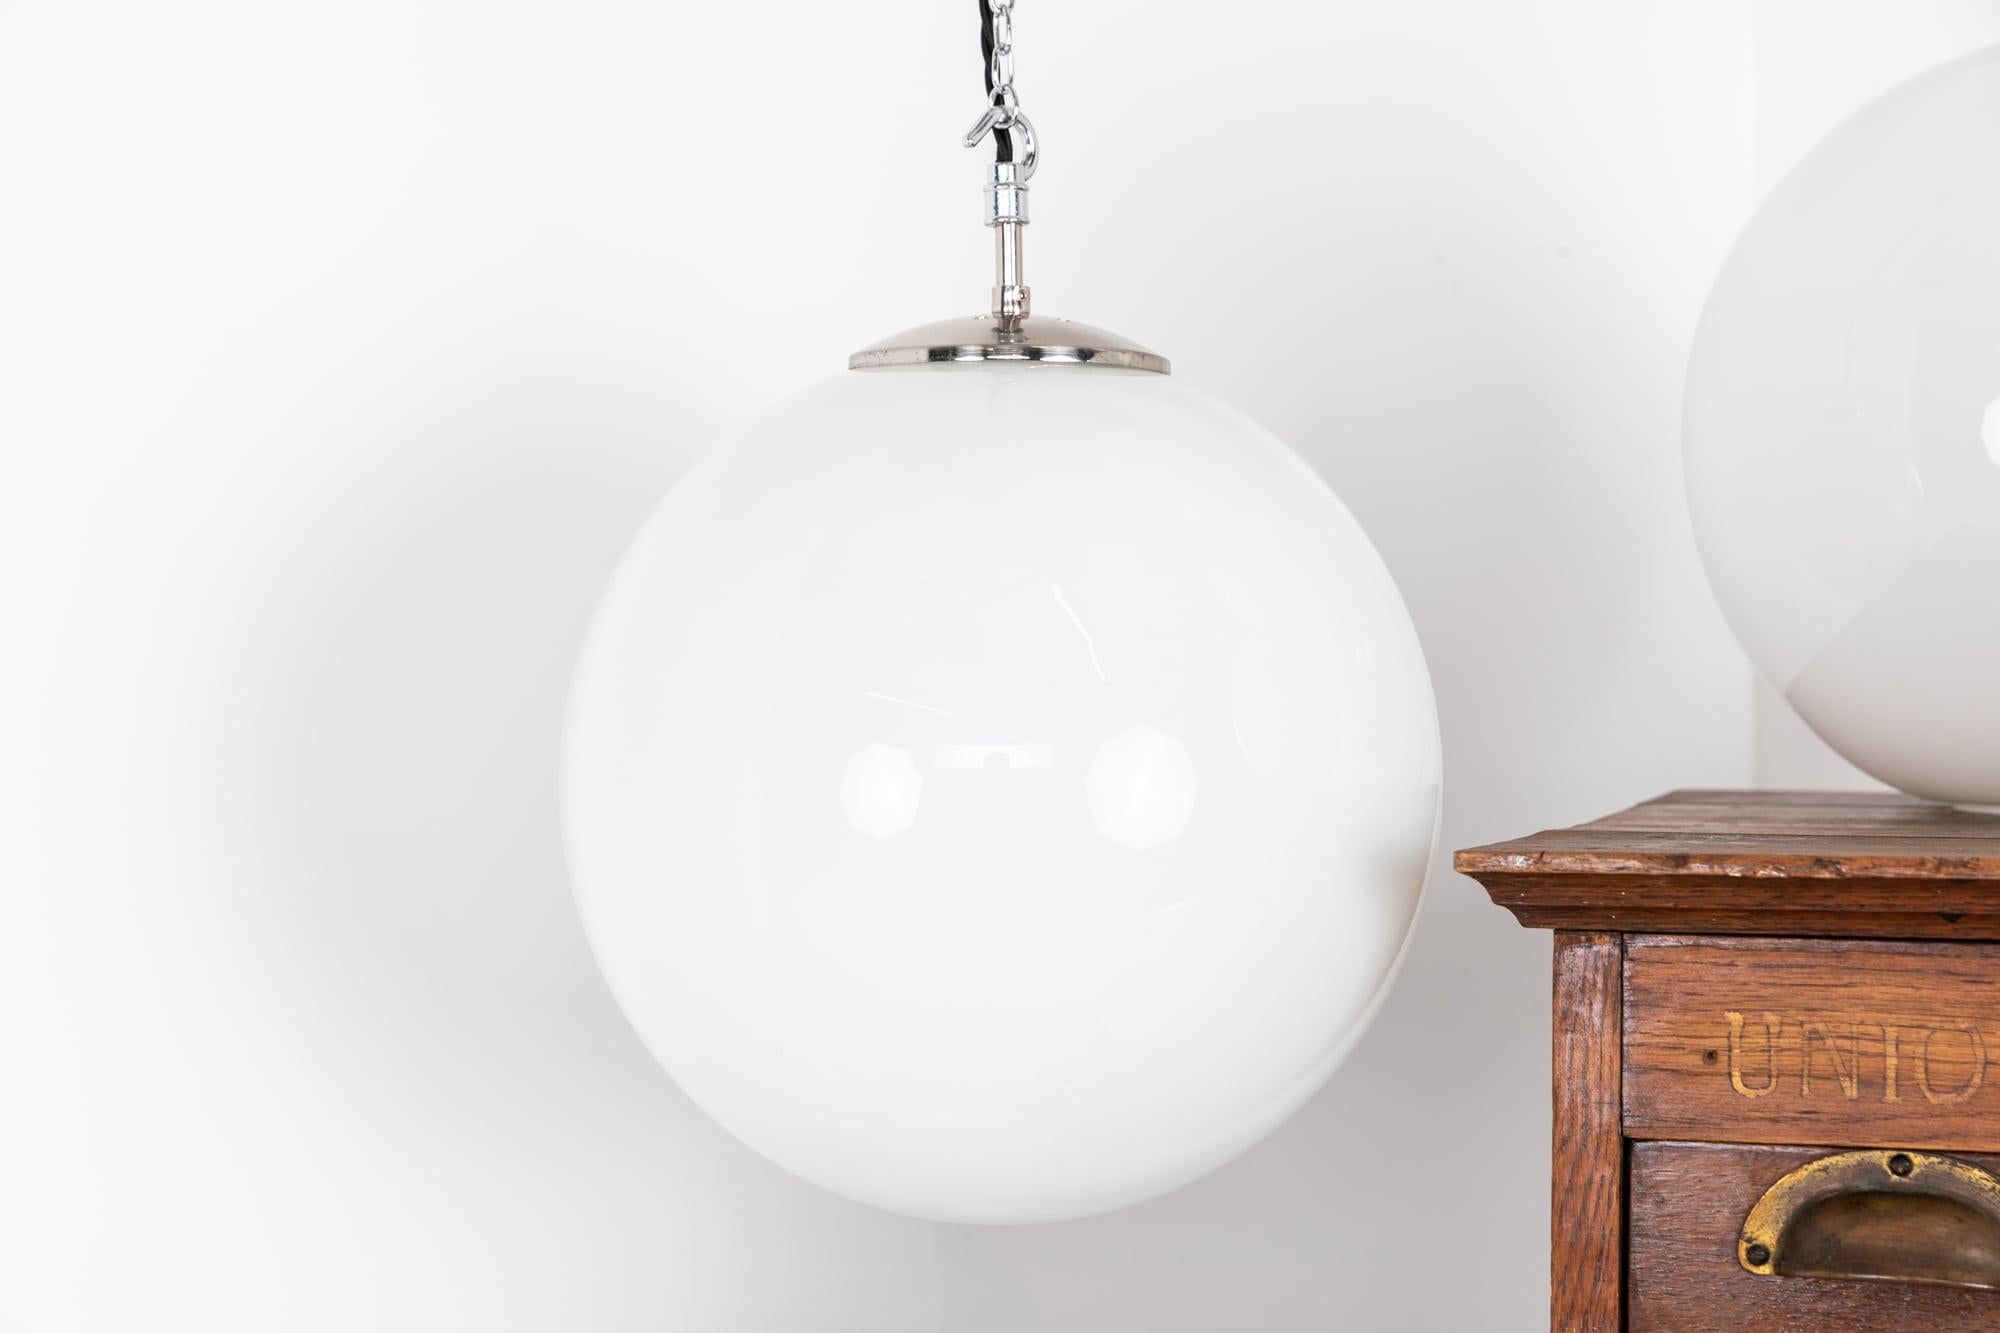 Hand-Crafted Large Art Deco Globe Opaline Glass Pendant Lamp Chrome Gallery, C.1940 For Sale